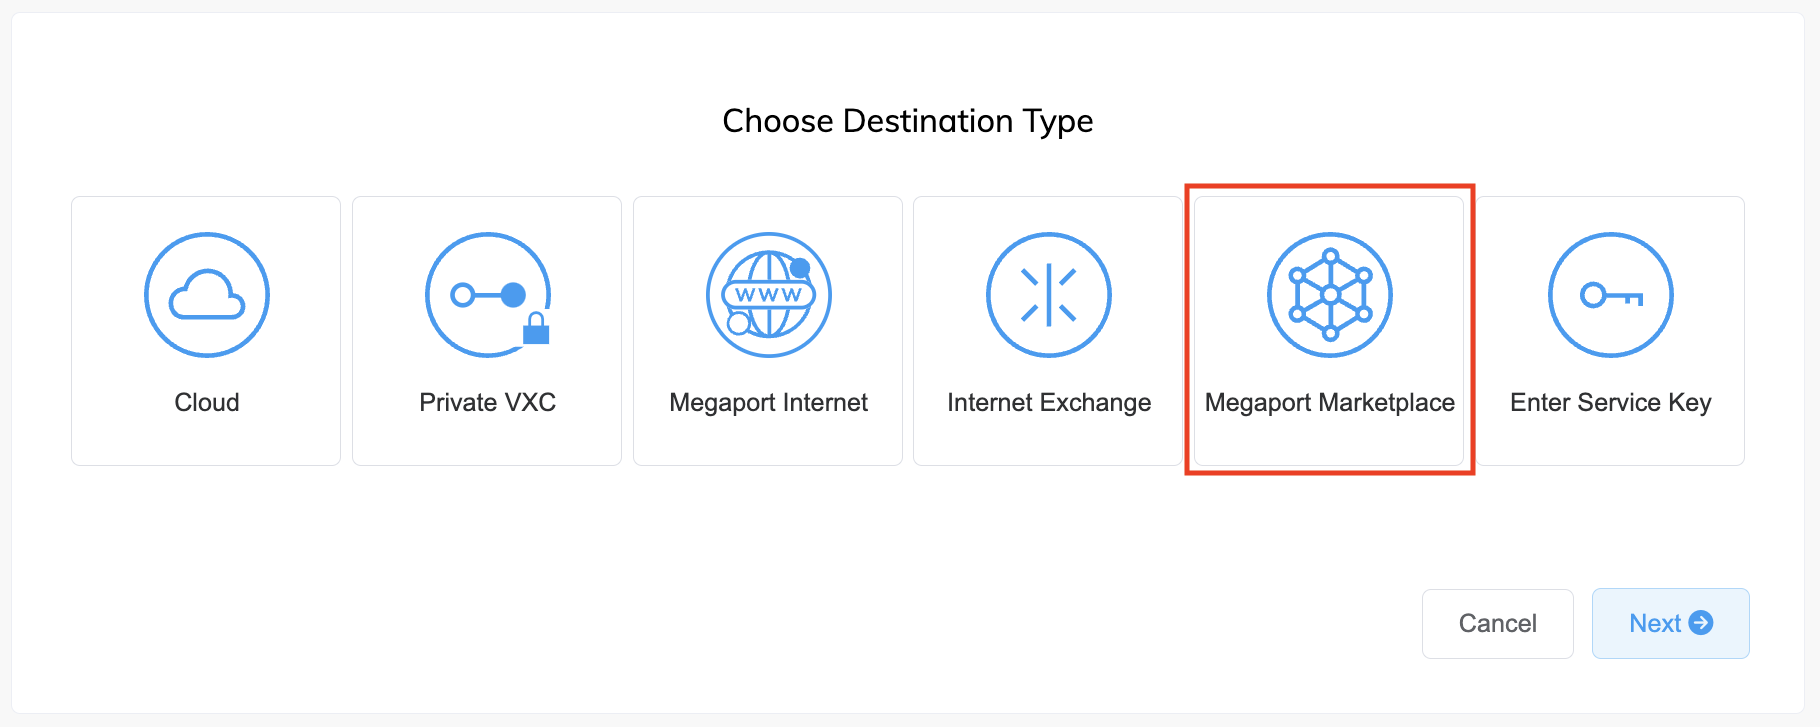 Add Megaport Marketplace Connection